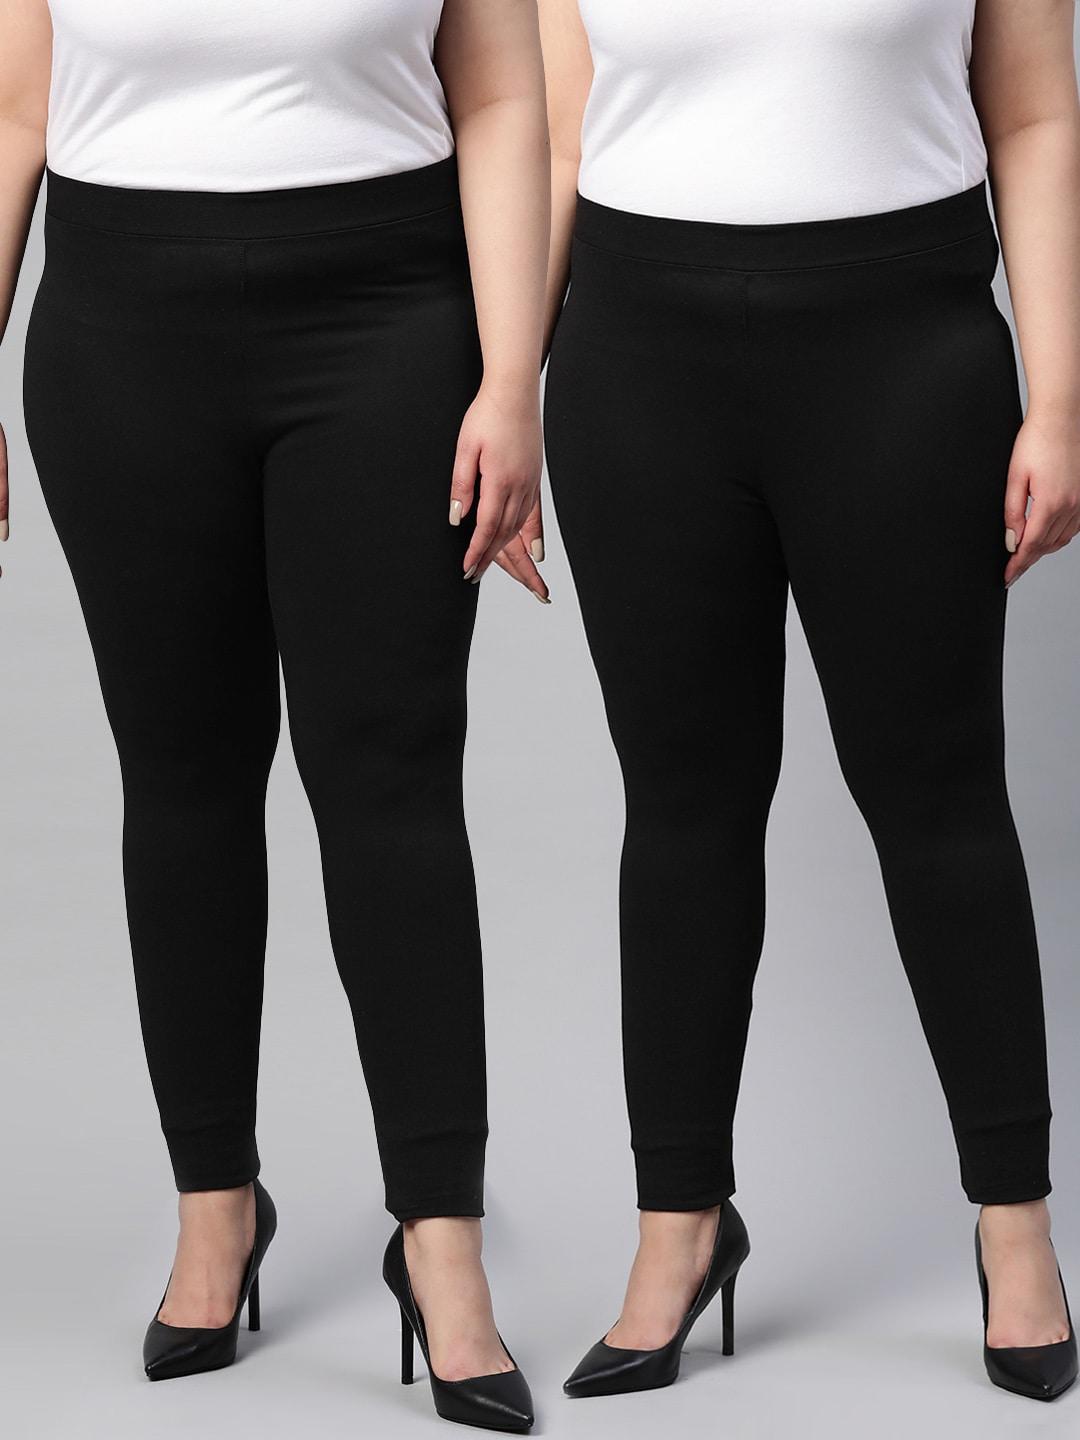 dorothy perkins plus size women pack of 2 solid skinny fit ankle-length jeggings